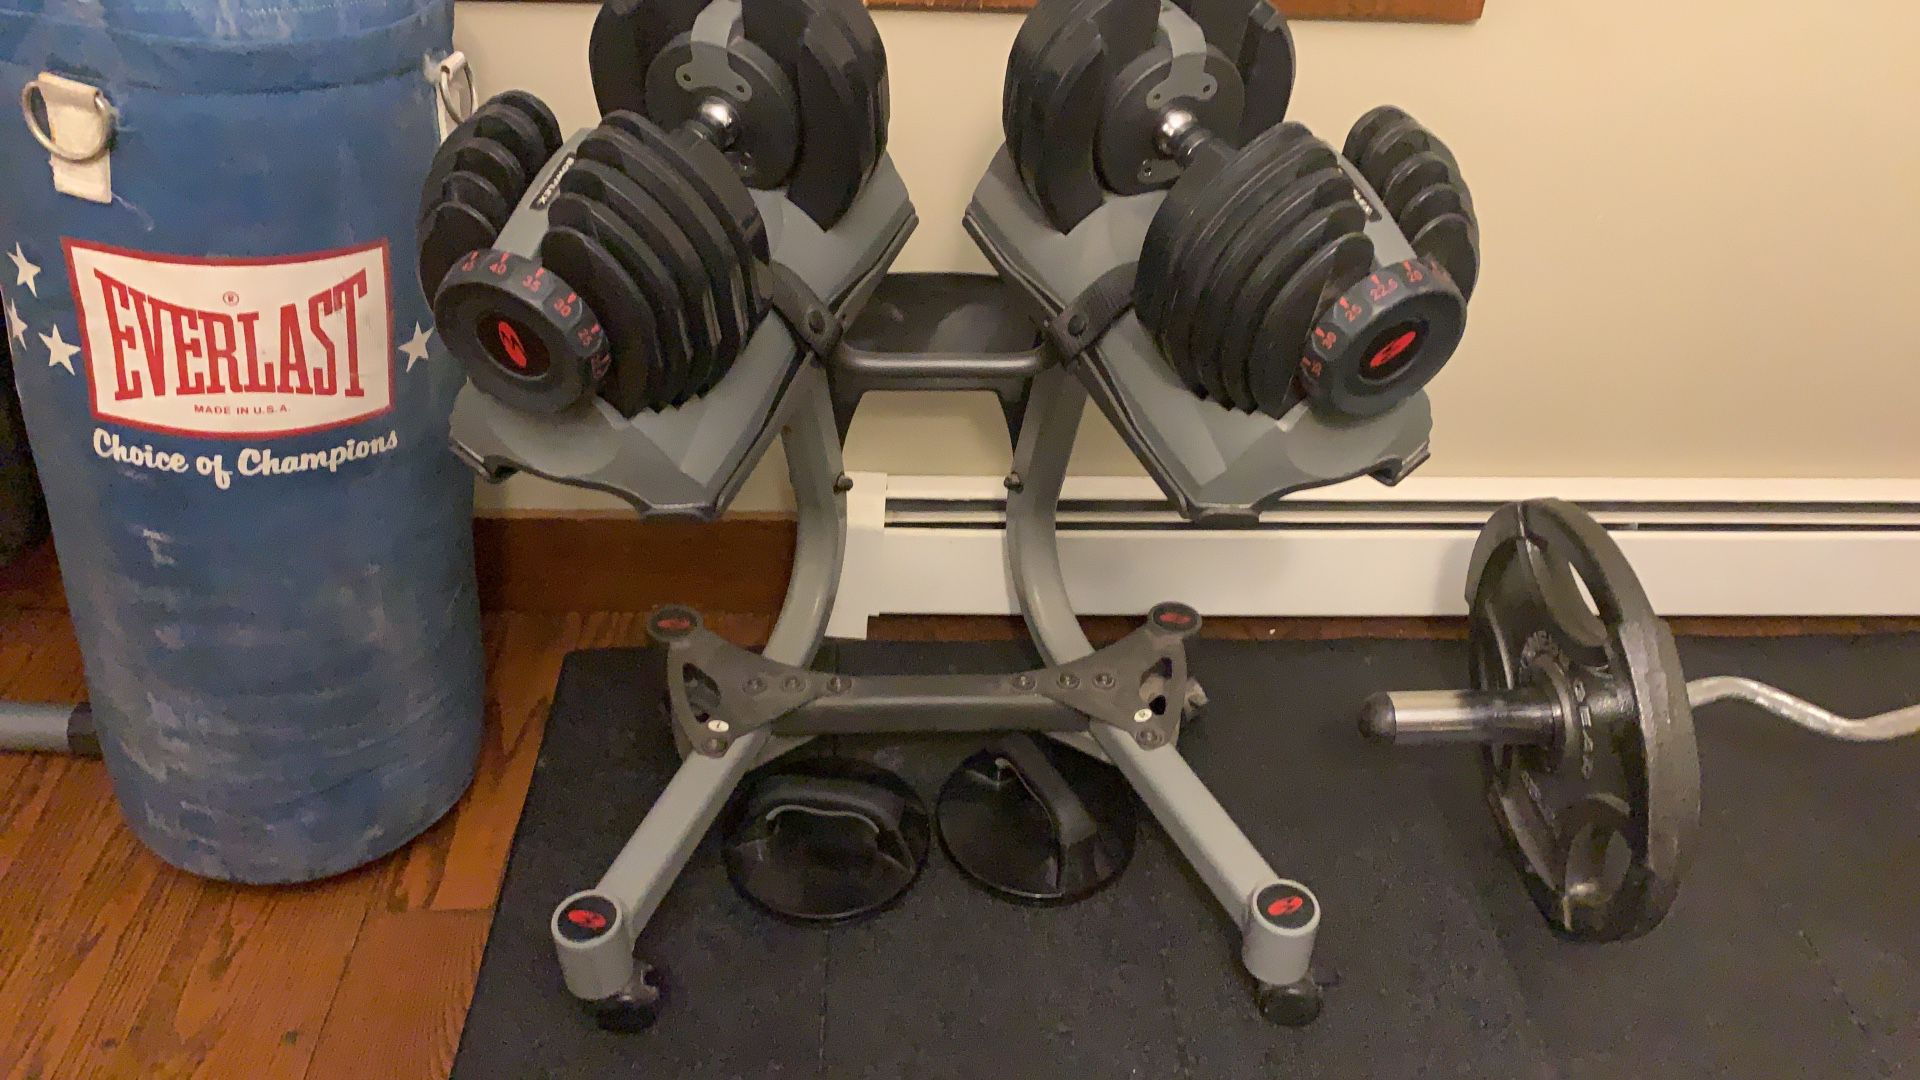 Bowflex 552 dumbbell set with stand on wheels. Check similar listings on eBay, Craigslist, and marketplace, $500-$600 for one (1) dumbbell. This is